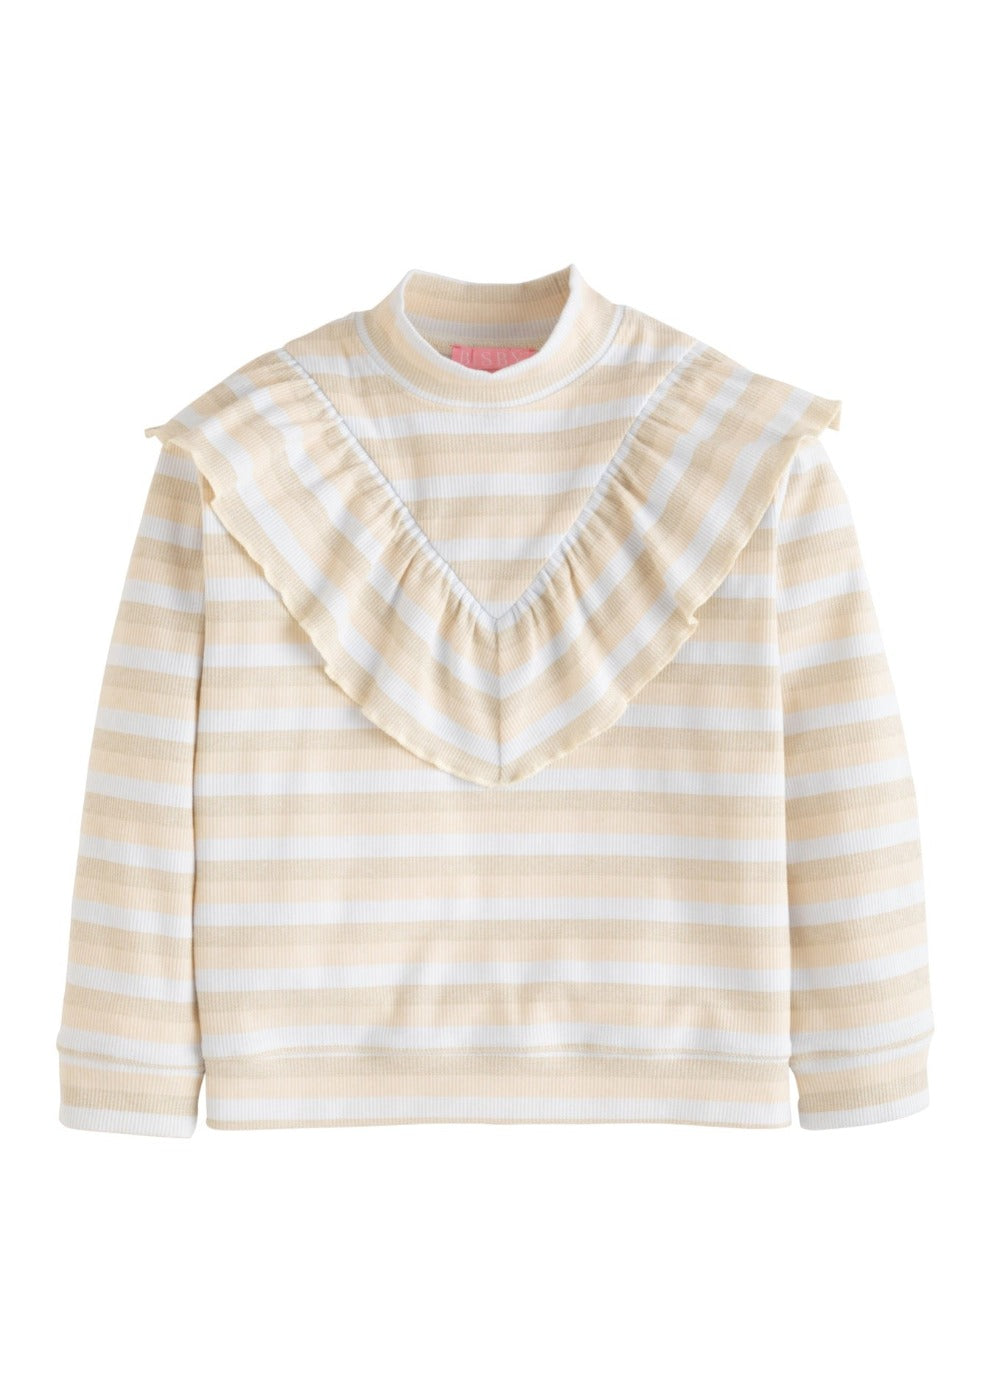 girls rib knit turtleneck top with ruffles, striped cream and white colors, tween girl clothing